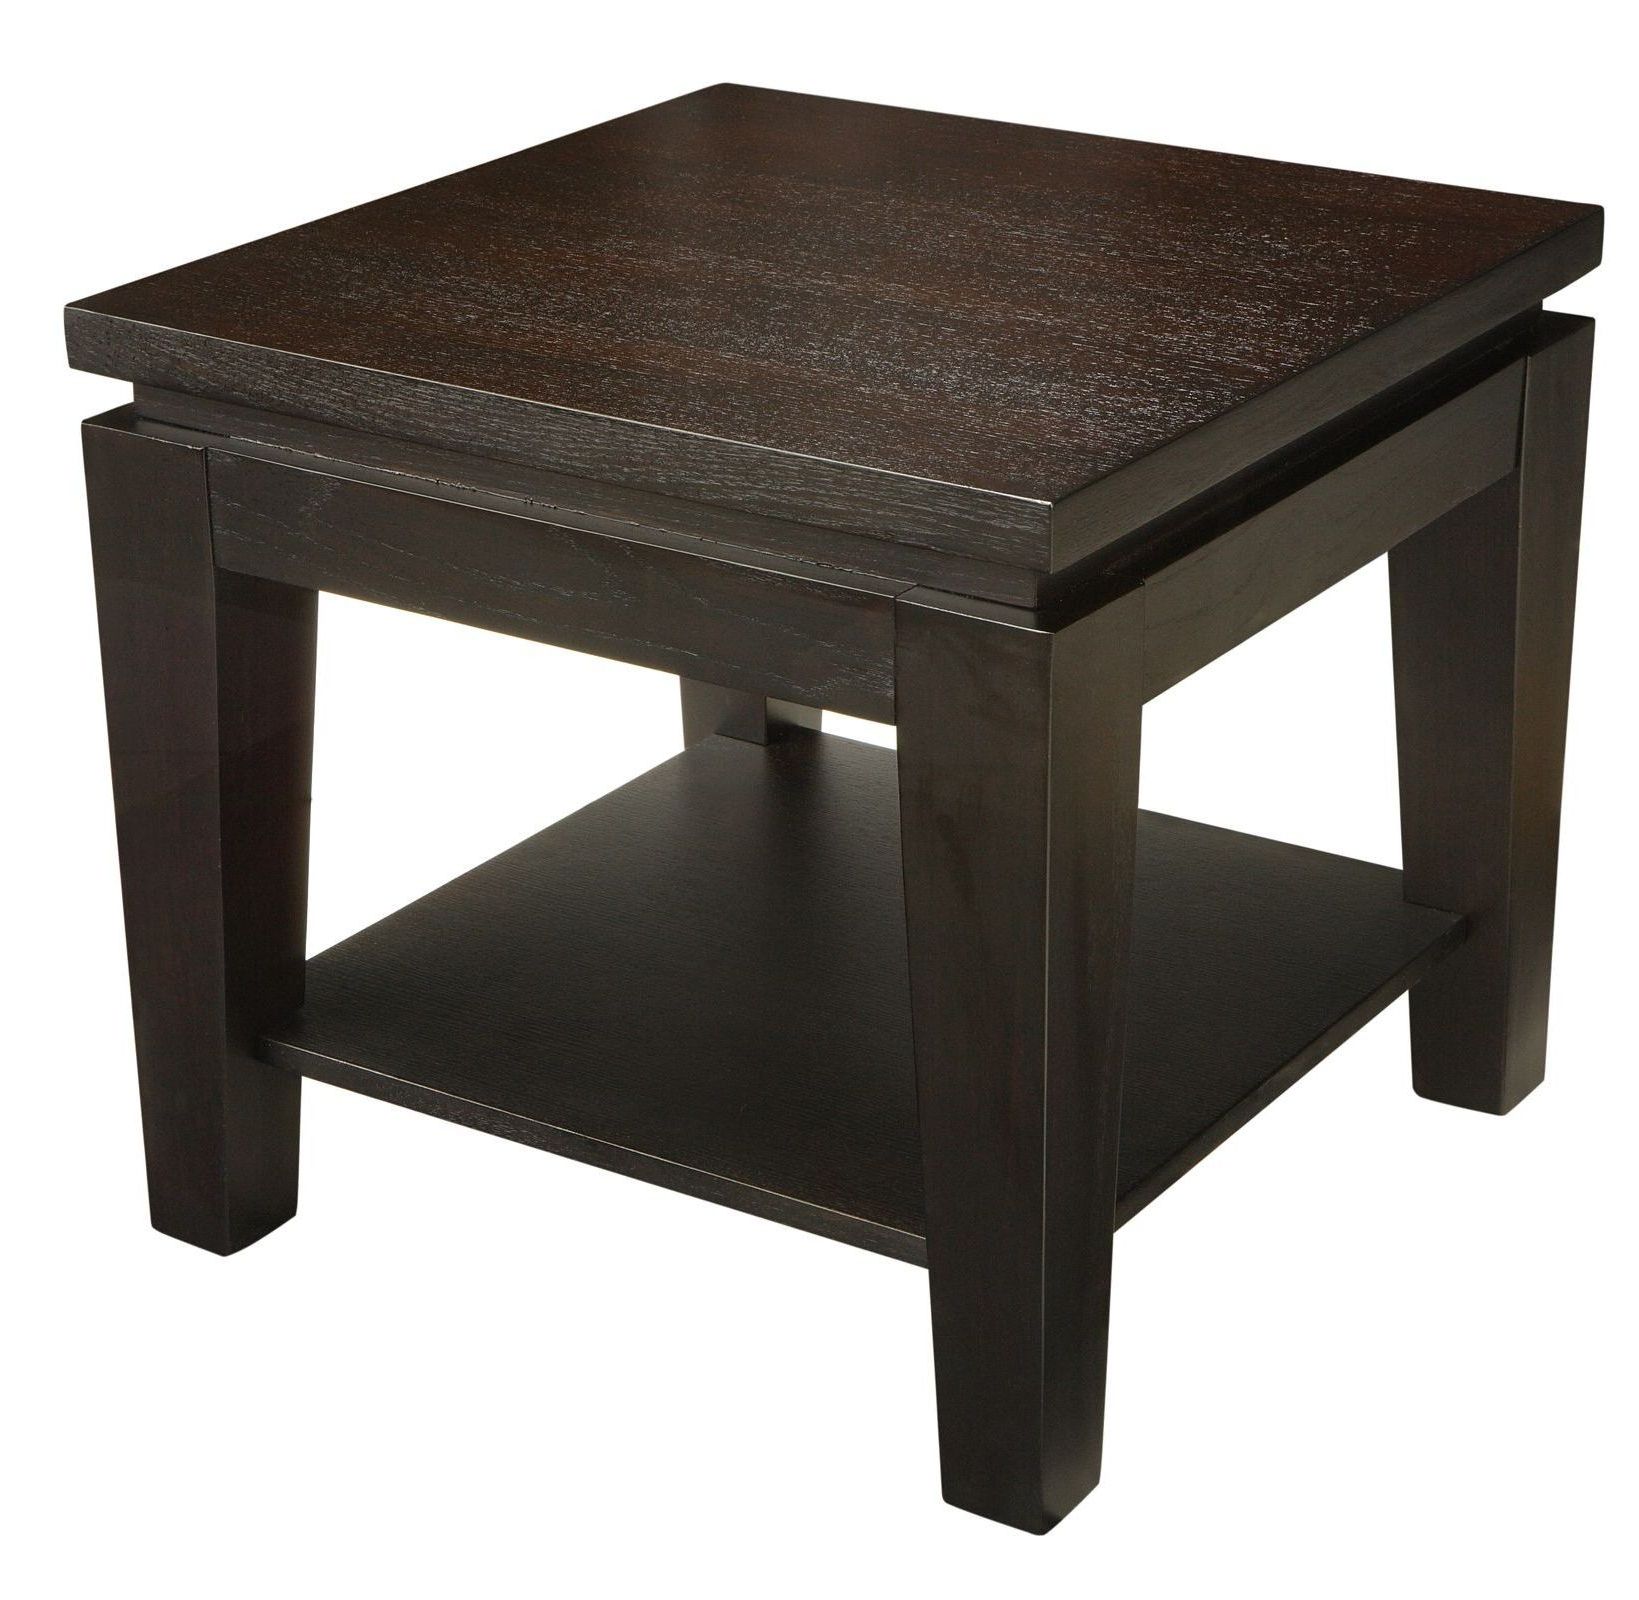 Fashionable Square Modern Accent Tables Throughout Asia Square End Table With Shelf From Sunpan ( (View 9 of 20)